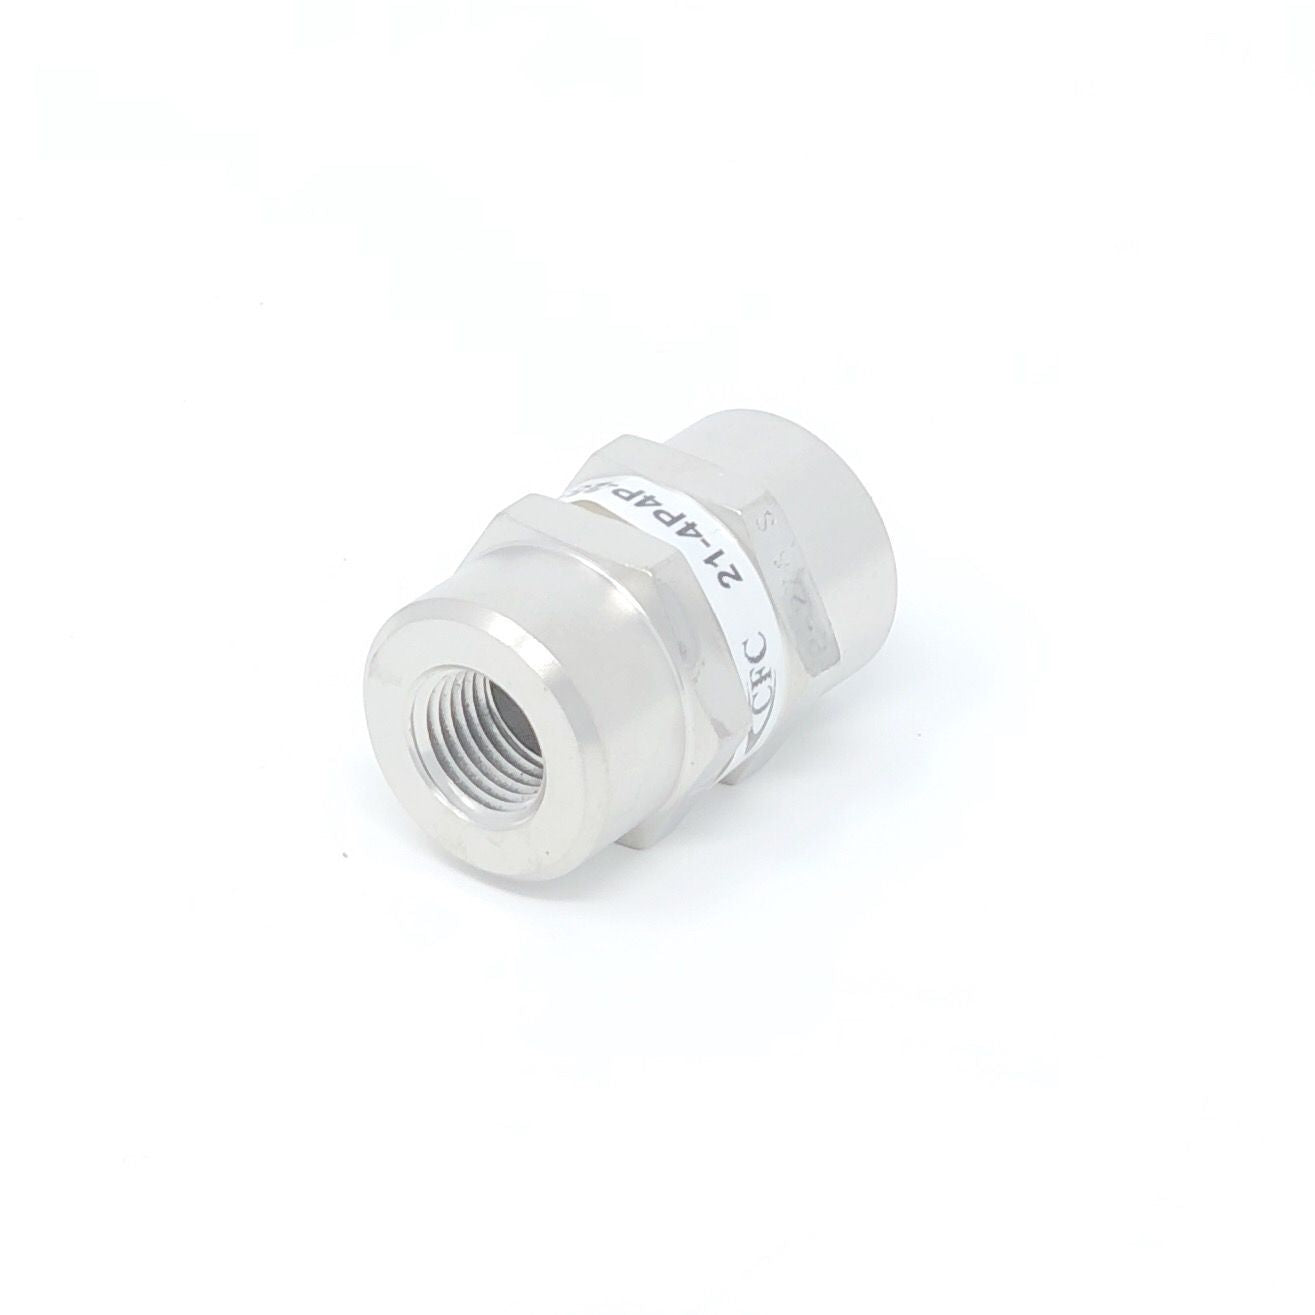 21-8M8M-18S : Chase High Pressure Inline Filter, 3000psi, #8 SAE (1/2"), 18 Micron, No Visual Indicator, With Bypass